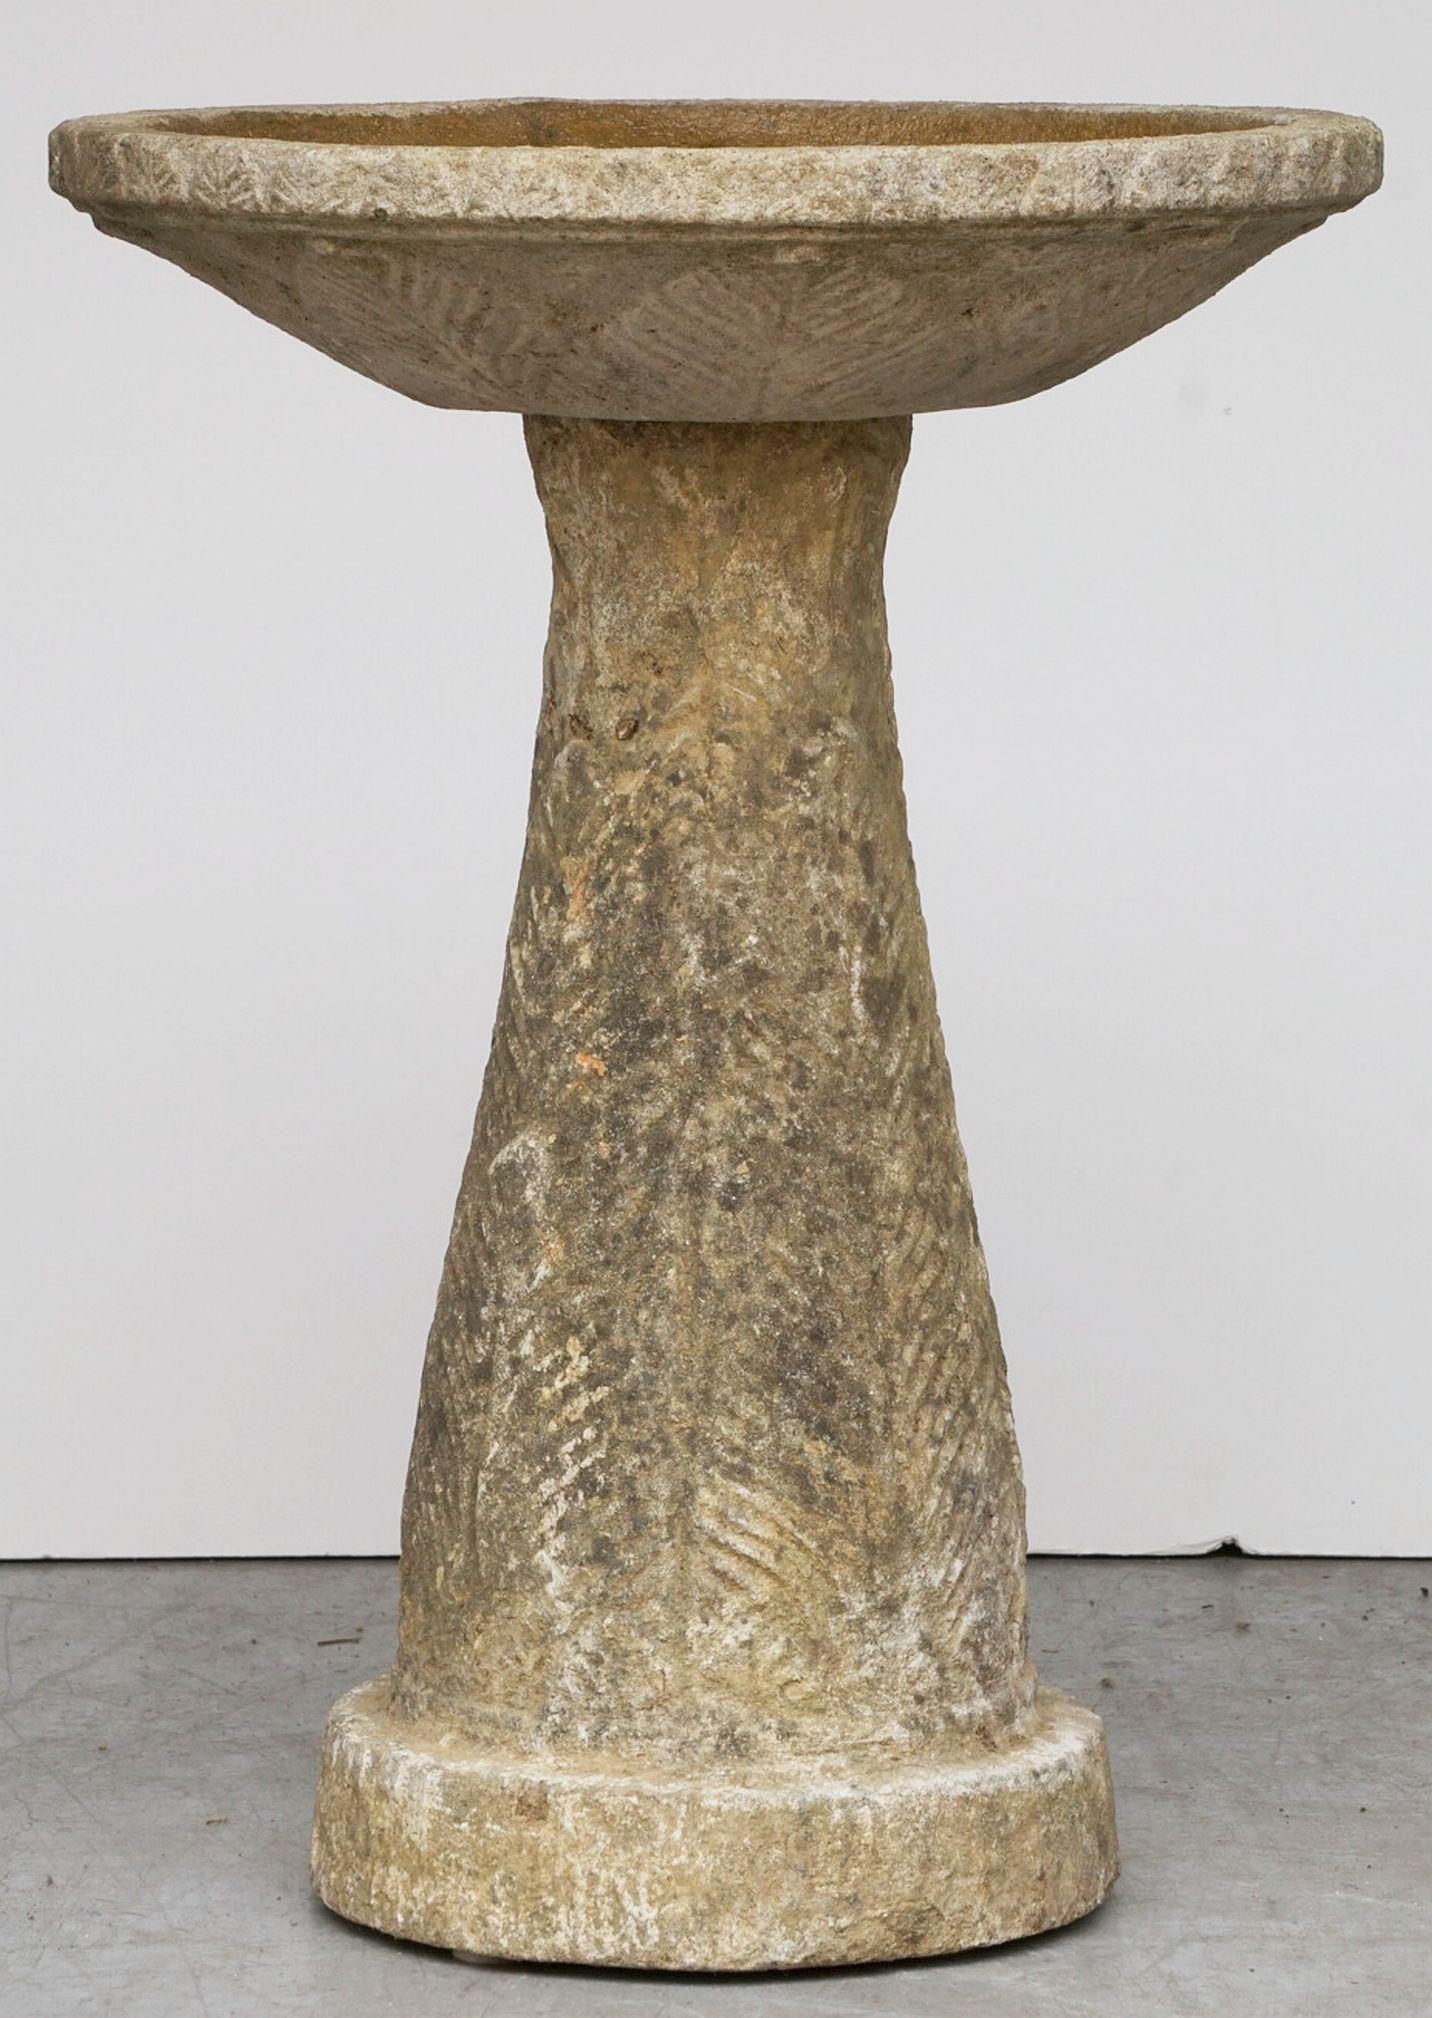 A handsome English bird bath (or birdbath) of composition stone, featuring a 18 3/4 inch diameter basin top (circular) set upon a conical base with foliate design.

Perfect for a garden room or conservatory!.


 